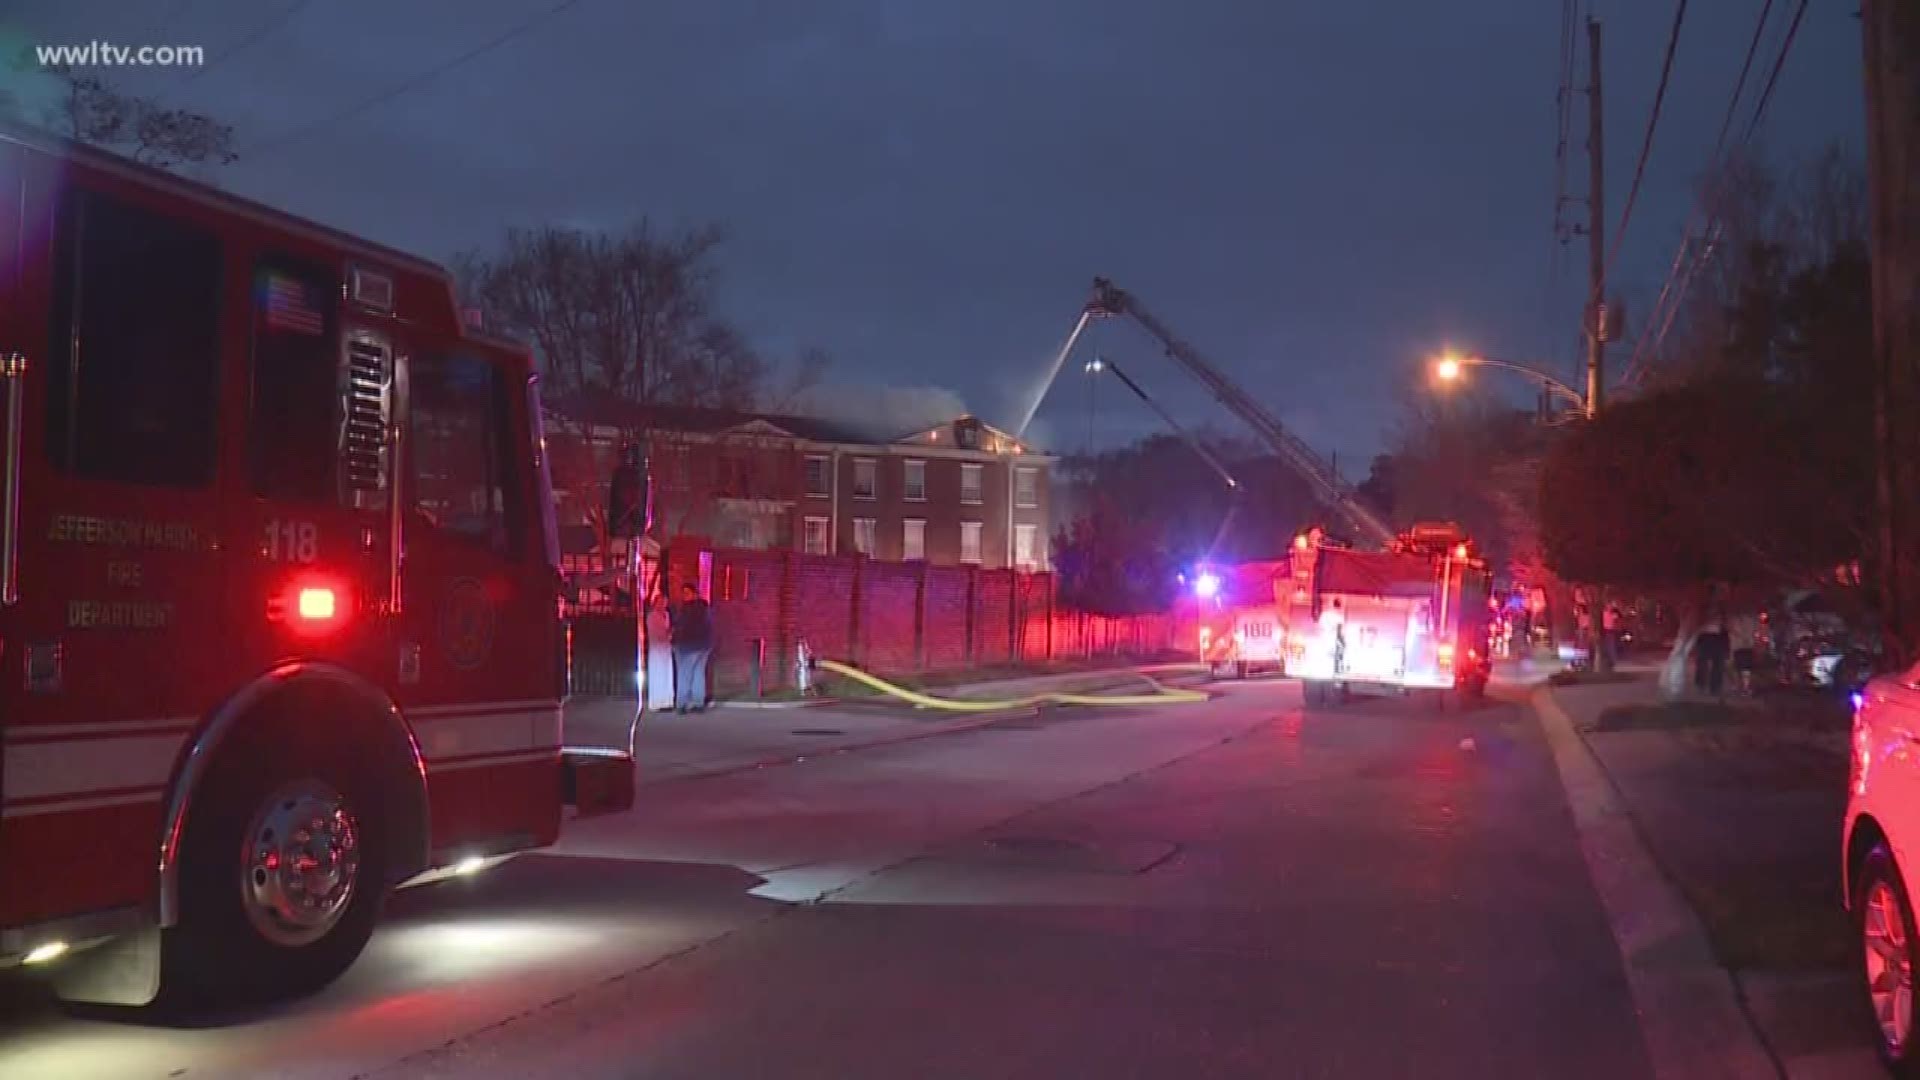 Eyewitness News reporter Meg Farris gives the update on the aftermath of a 2-alarm fire in Old Metairie that left a firefighter in critical condition and displaced dozens of residents.